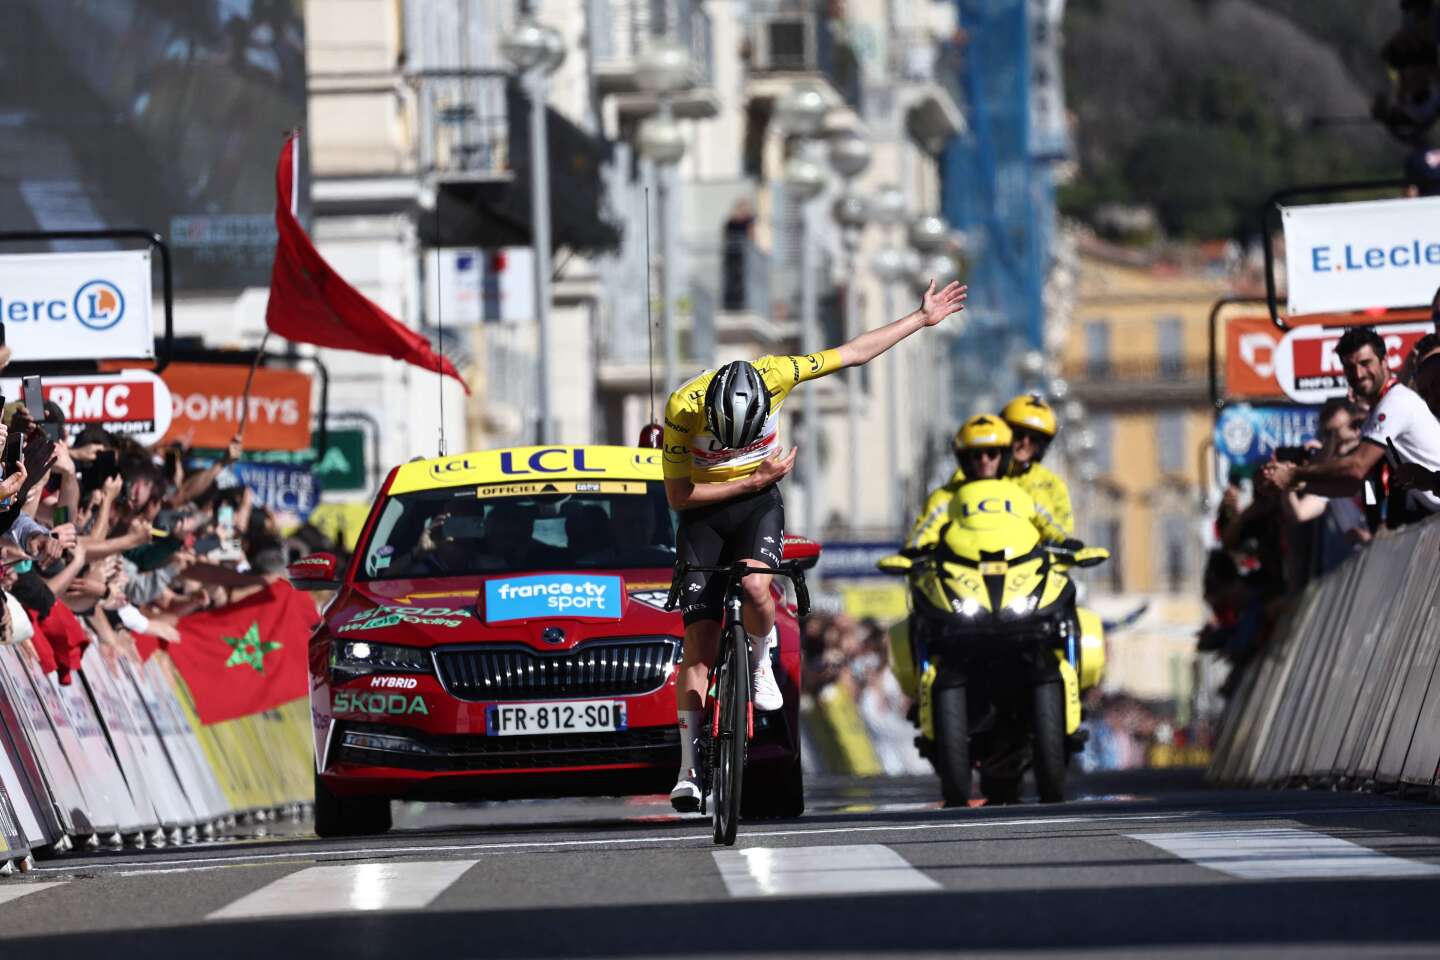 Tadej Pogacar, as “boss”, wins the last stage and the final victory of Paris-Nice